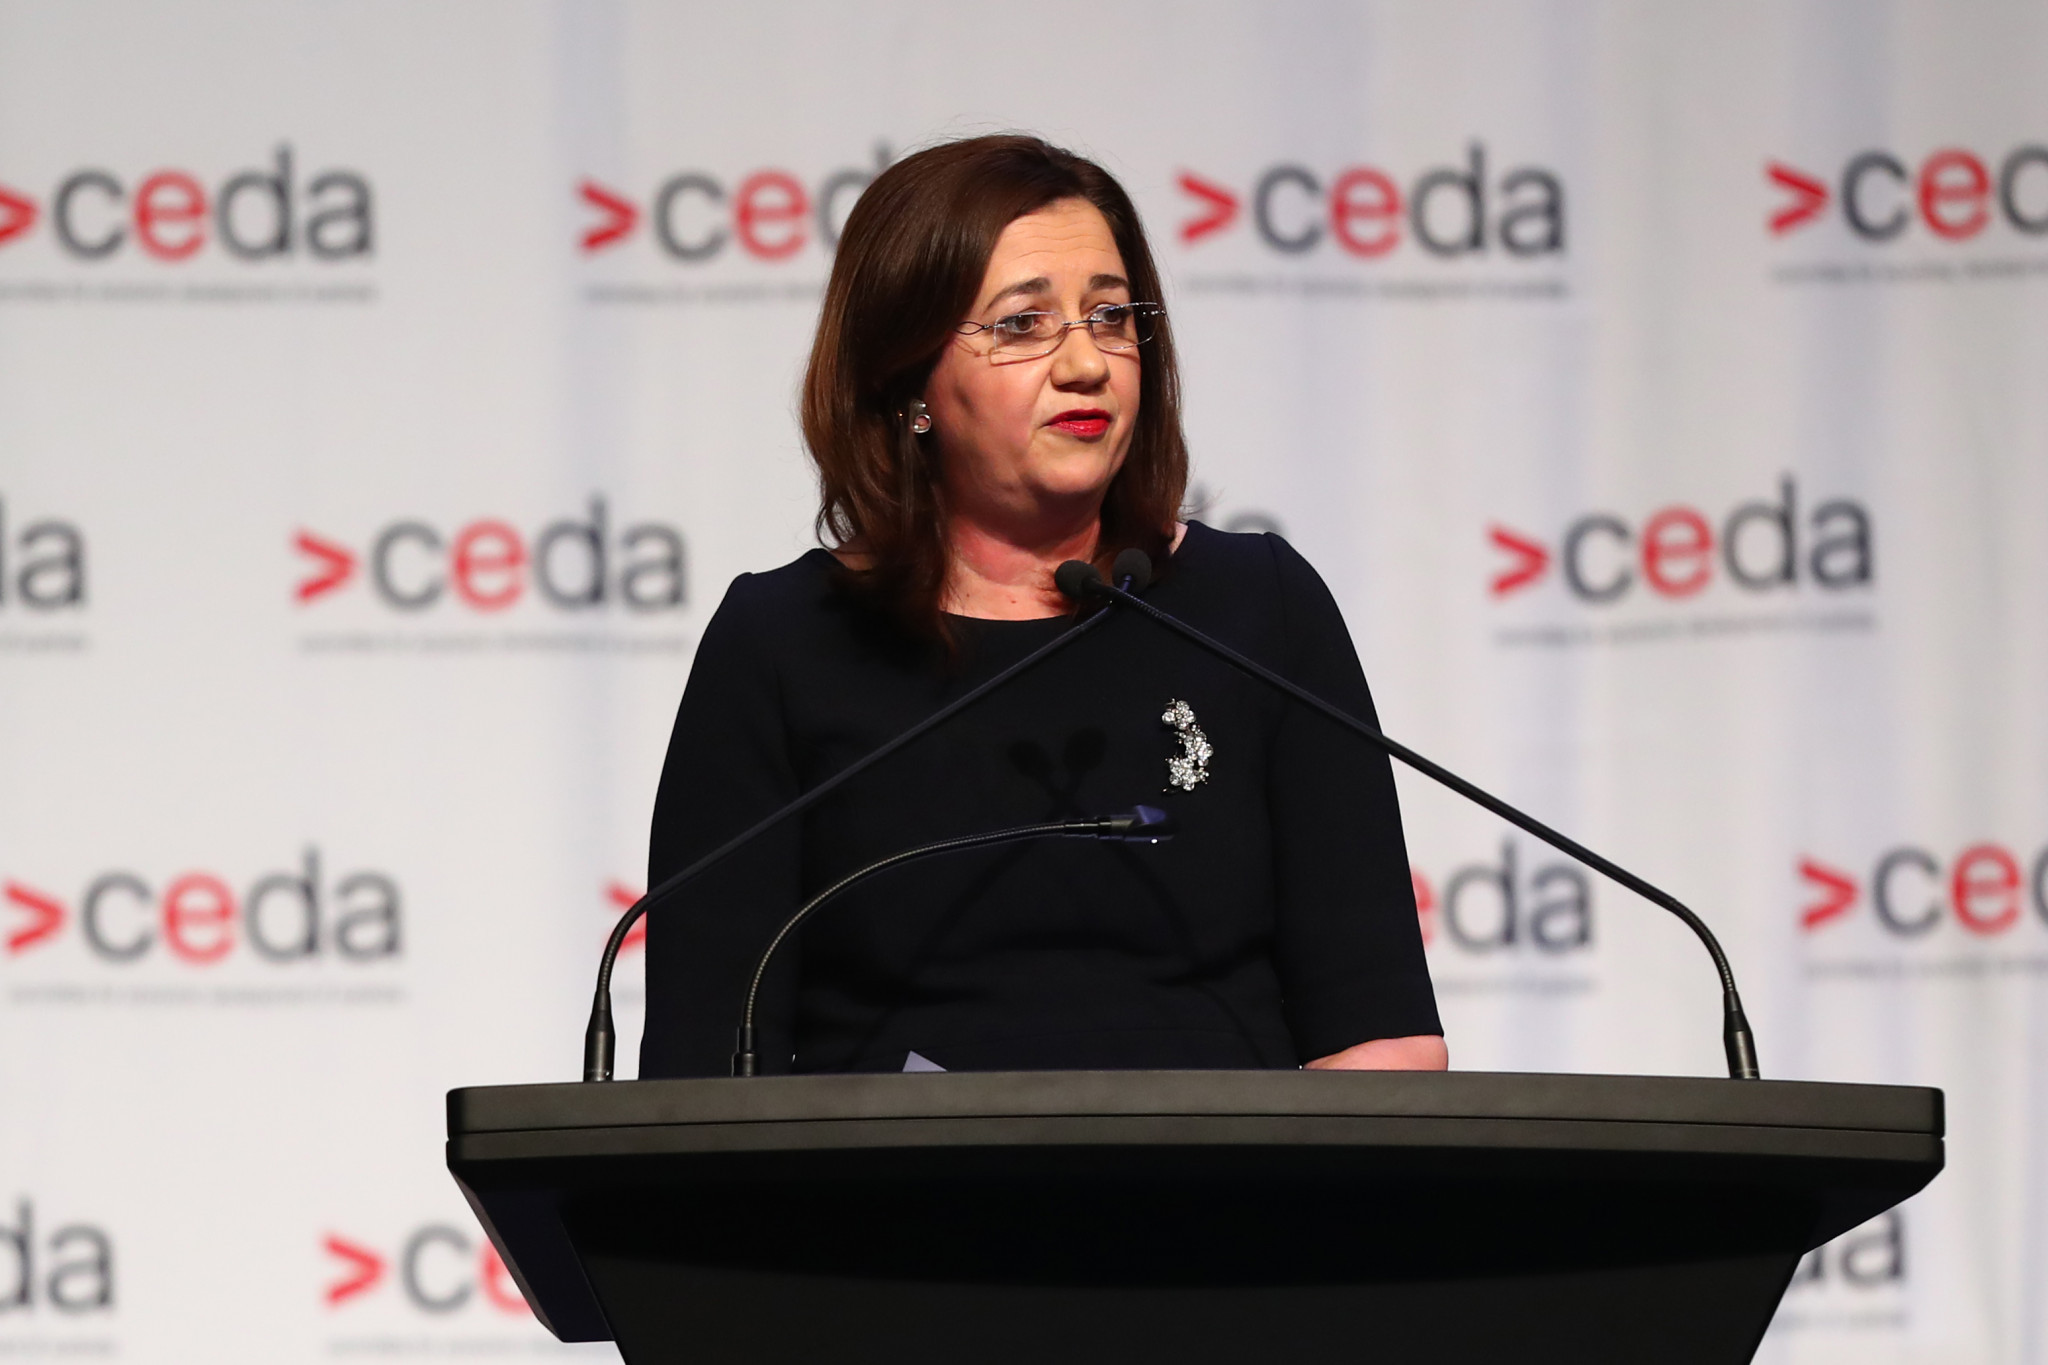 Queensland Premier Annastacia Palaszczuk confirmed the Olympic and Paralympic bid last week ©Getty Images